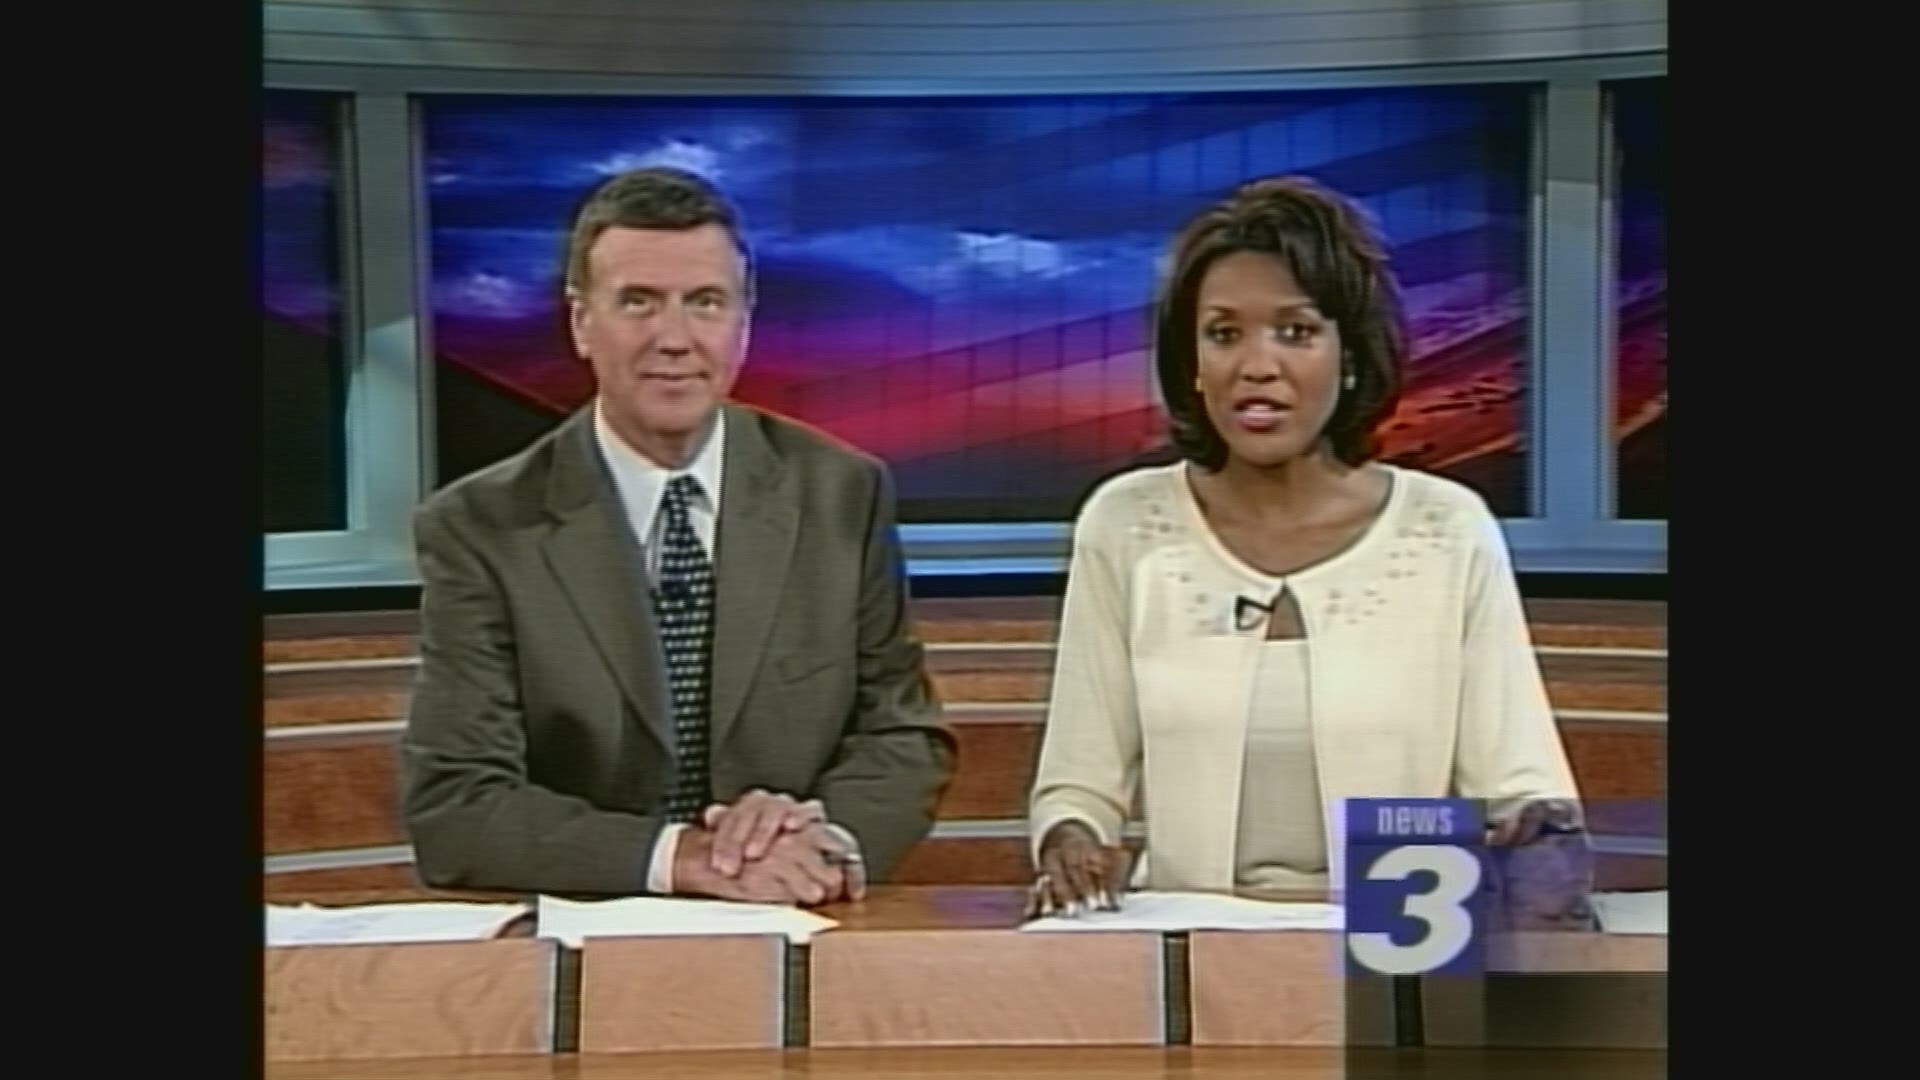 Throwback Thursday: Tim White and Romona Robinson anchor Channel 3 News